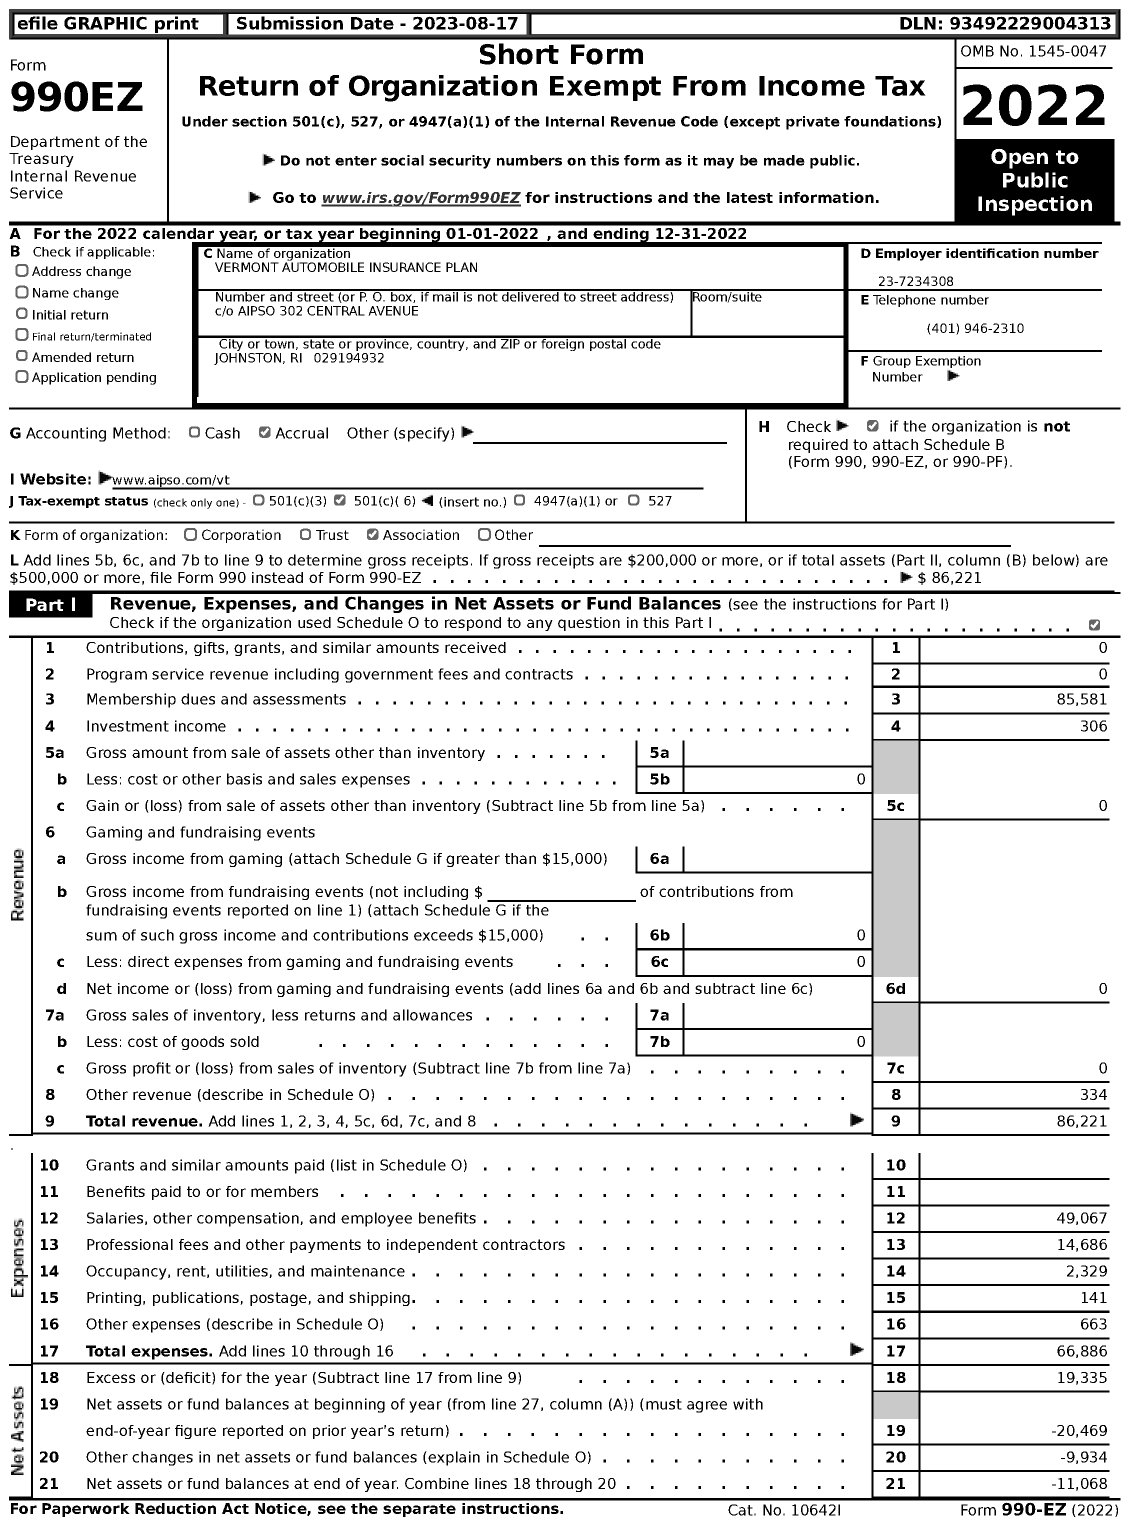 Image of first page of 2022 Form 990EZ for Vermont Automobile Insurance Plan